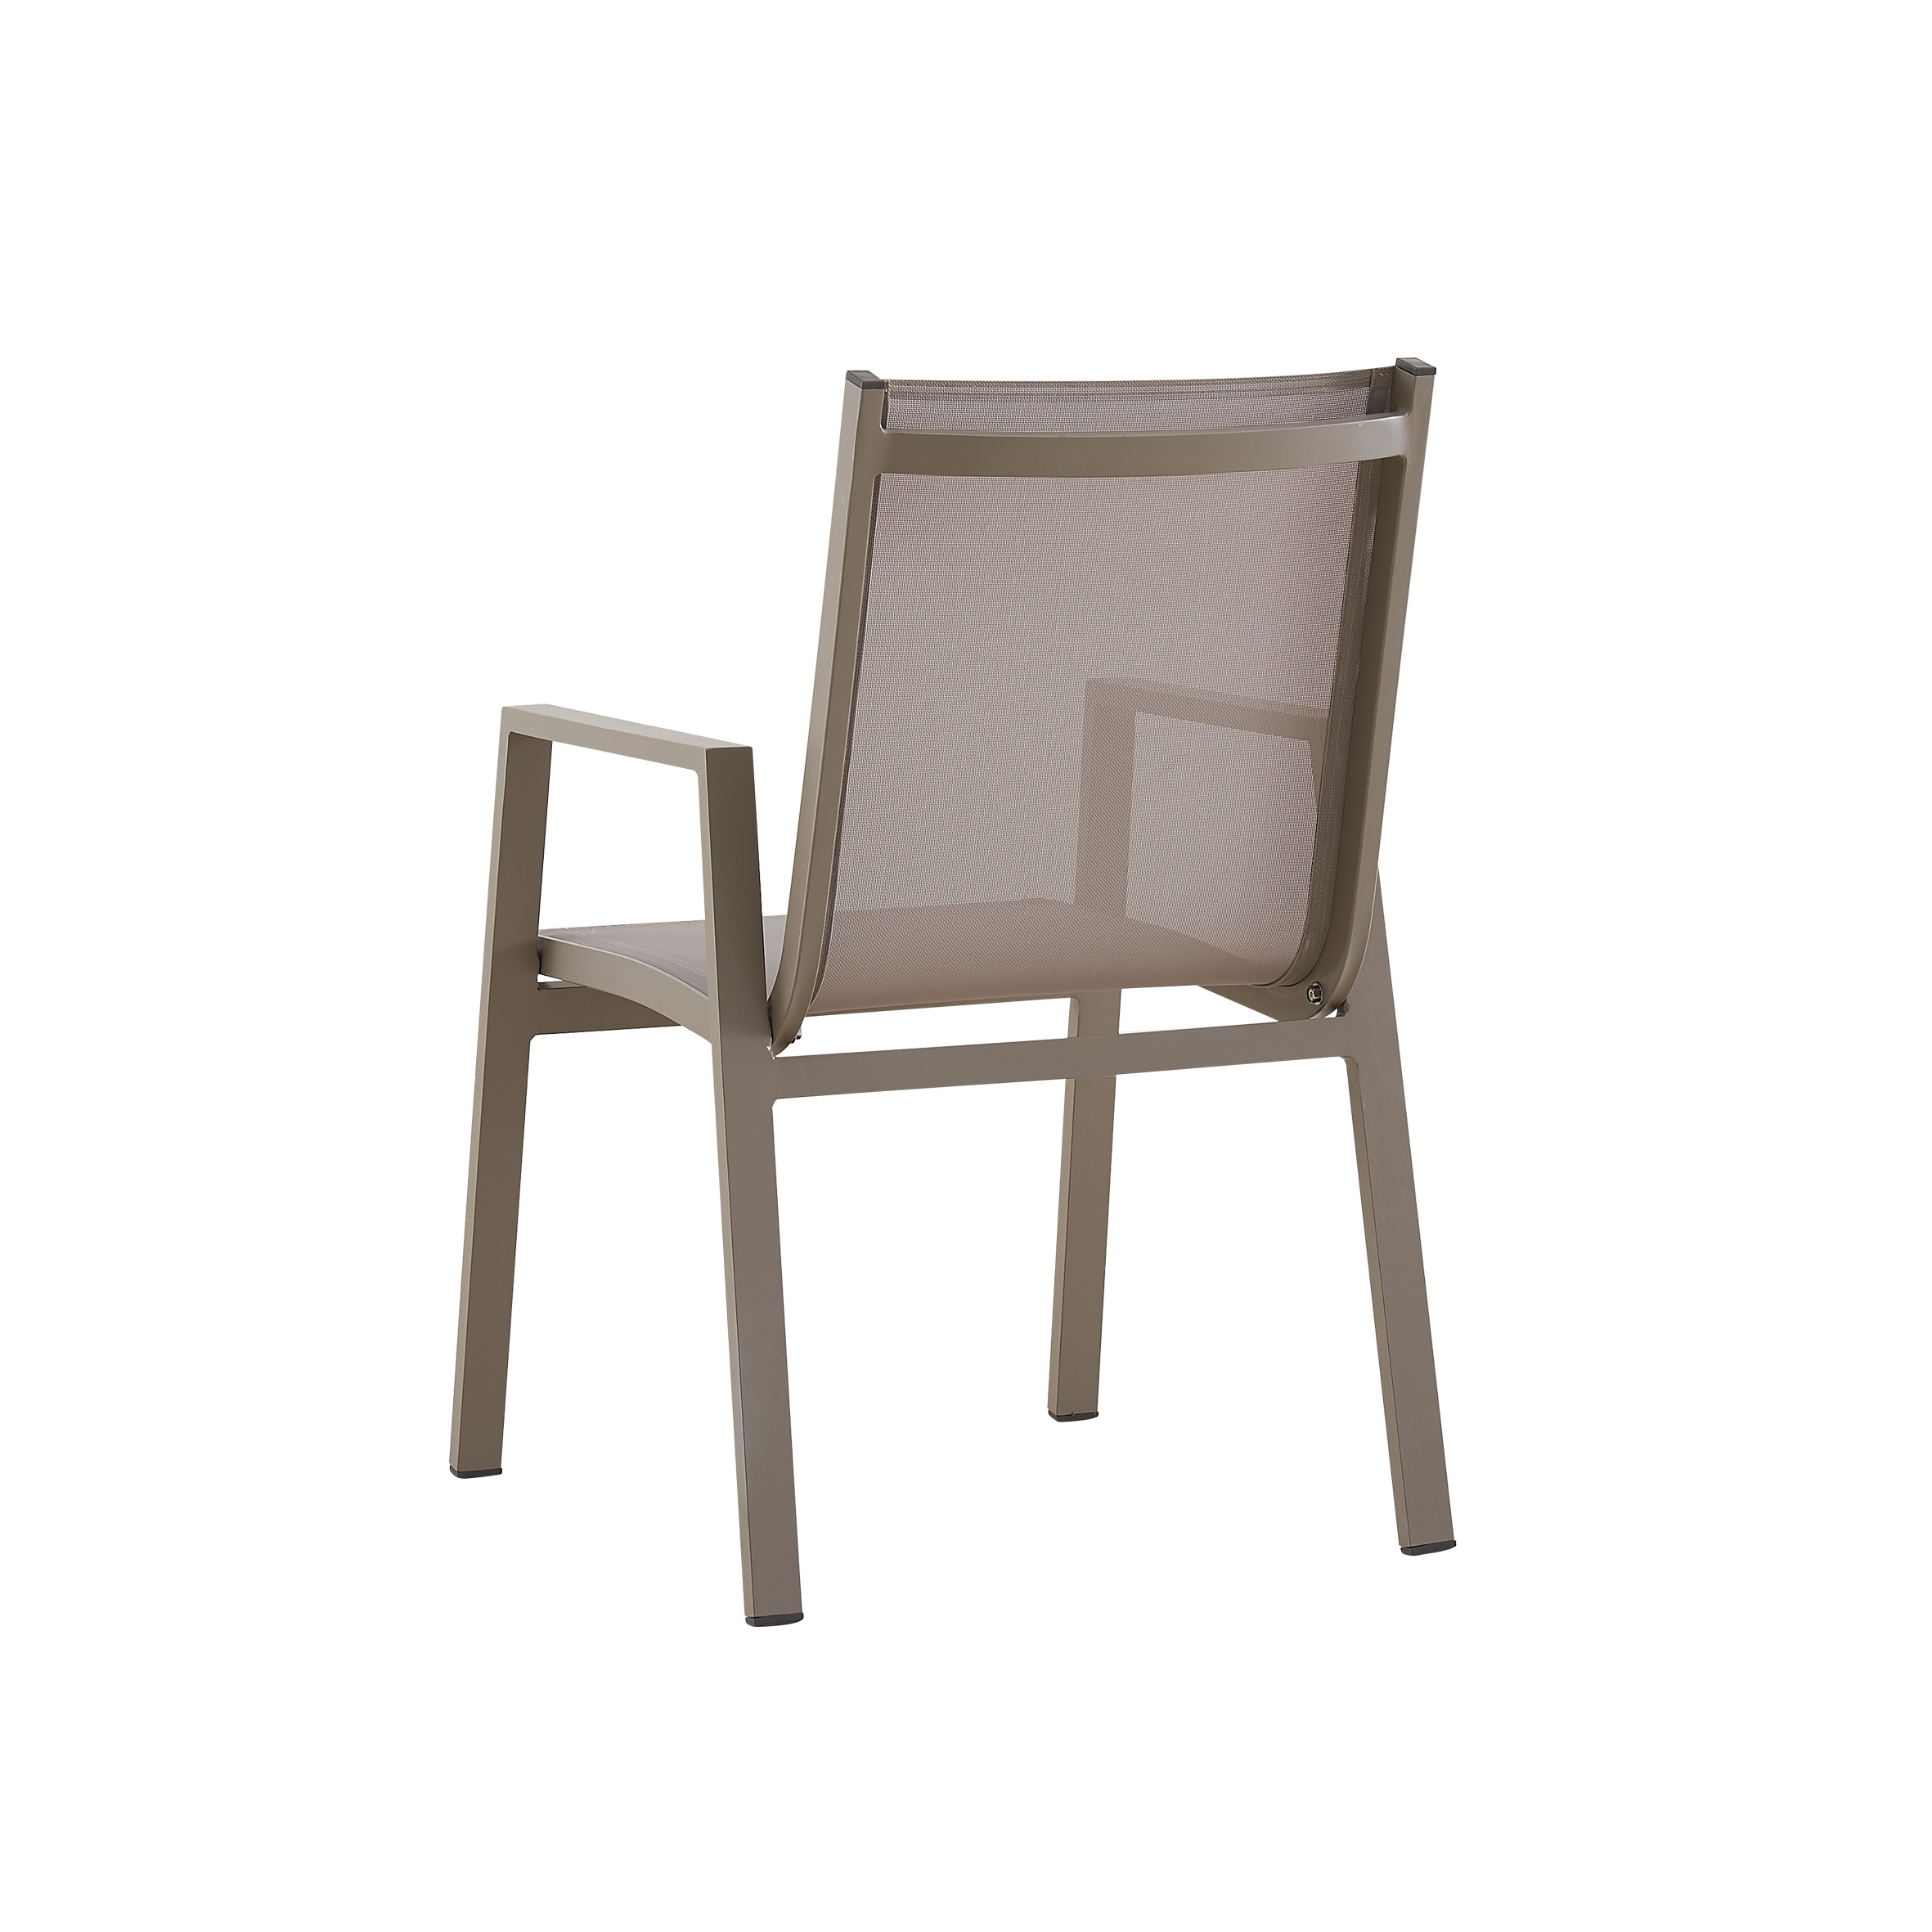 Snow white textile dining chair S9